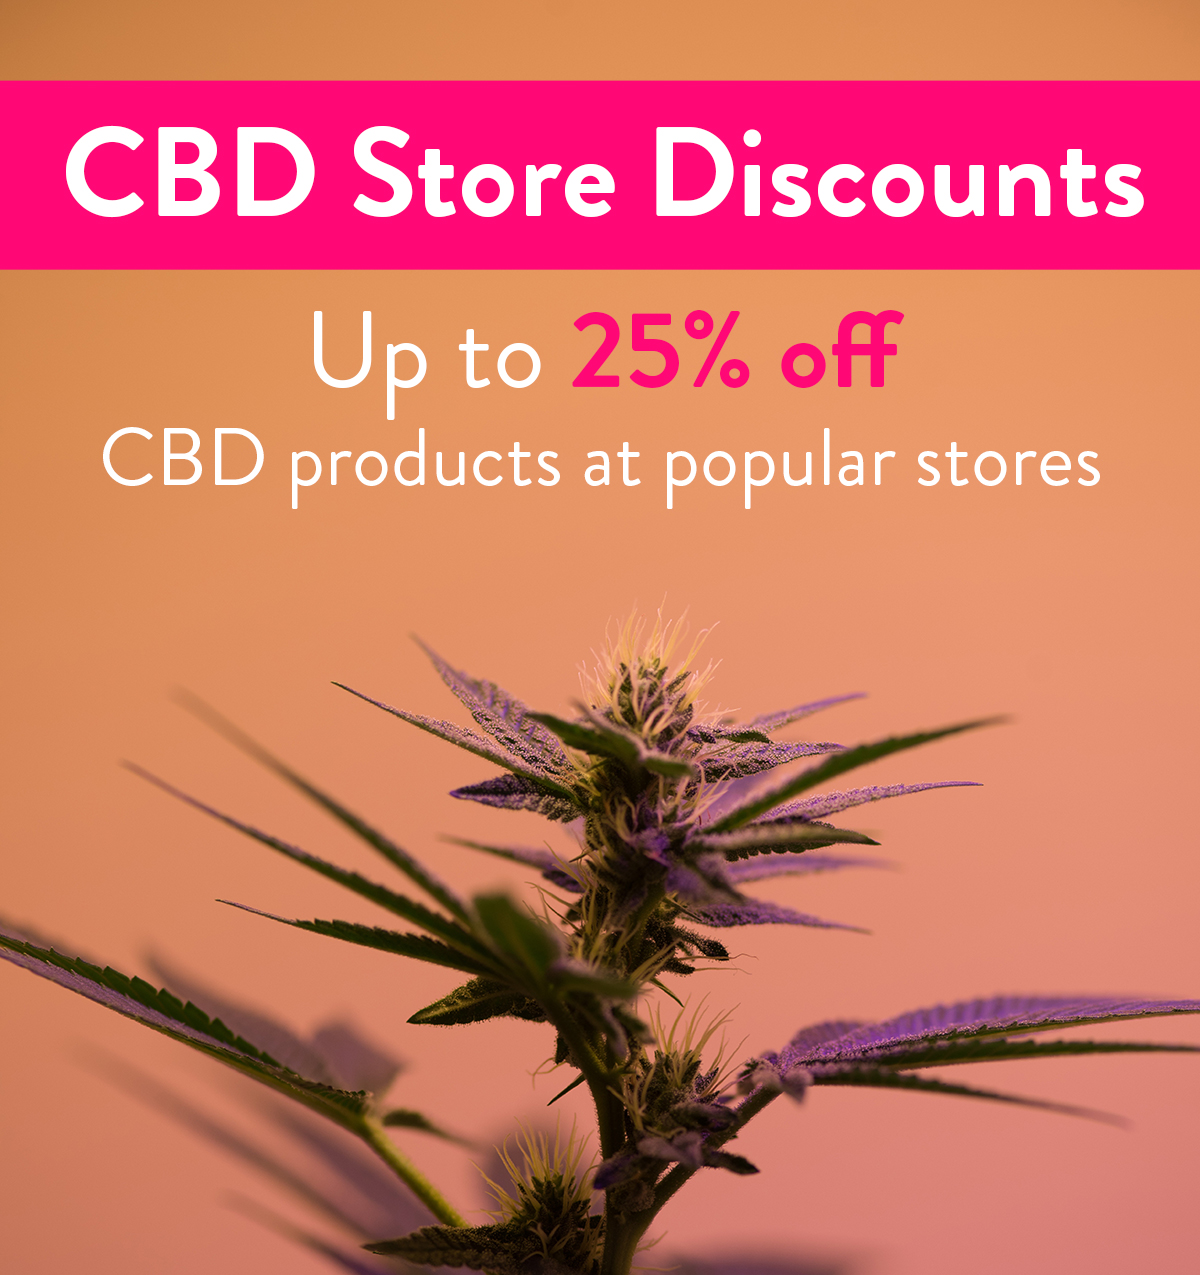 CBD Store Coupons: Get up to 25% CBD Discounts on products at popular CBD Stores!